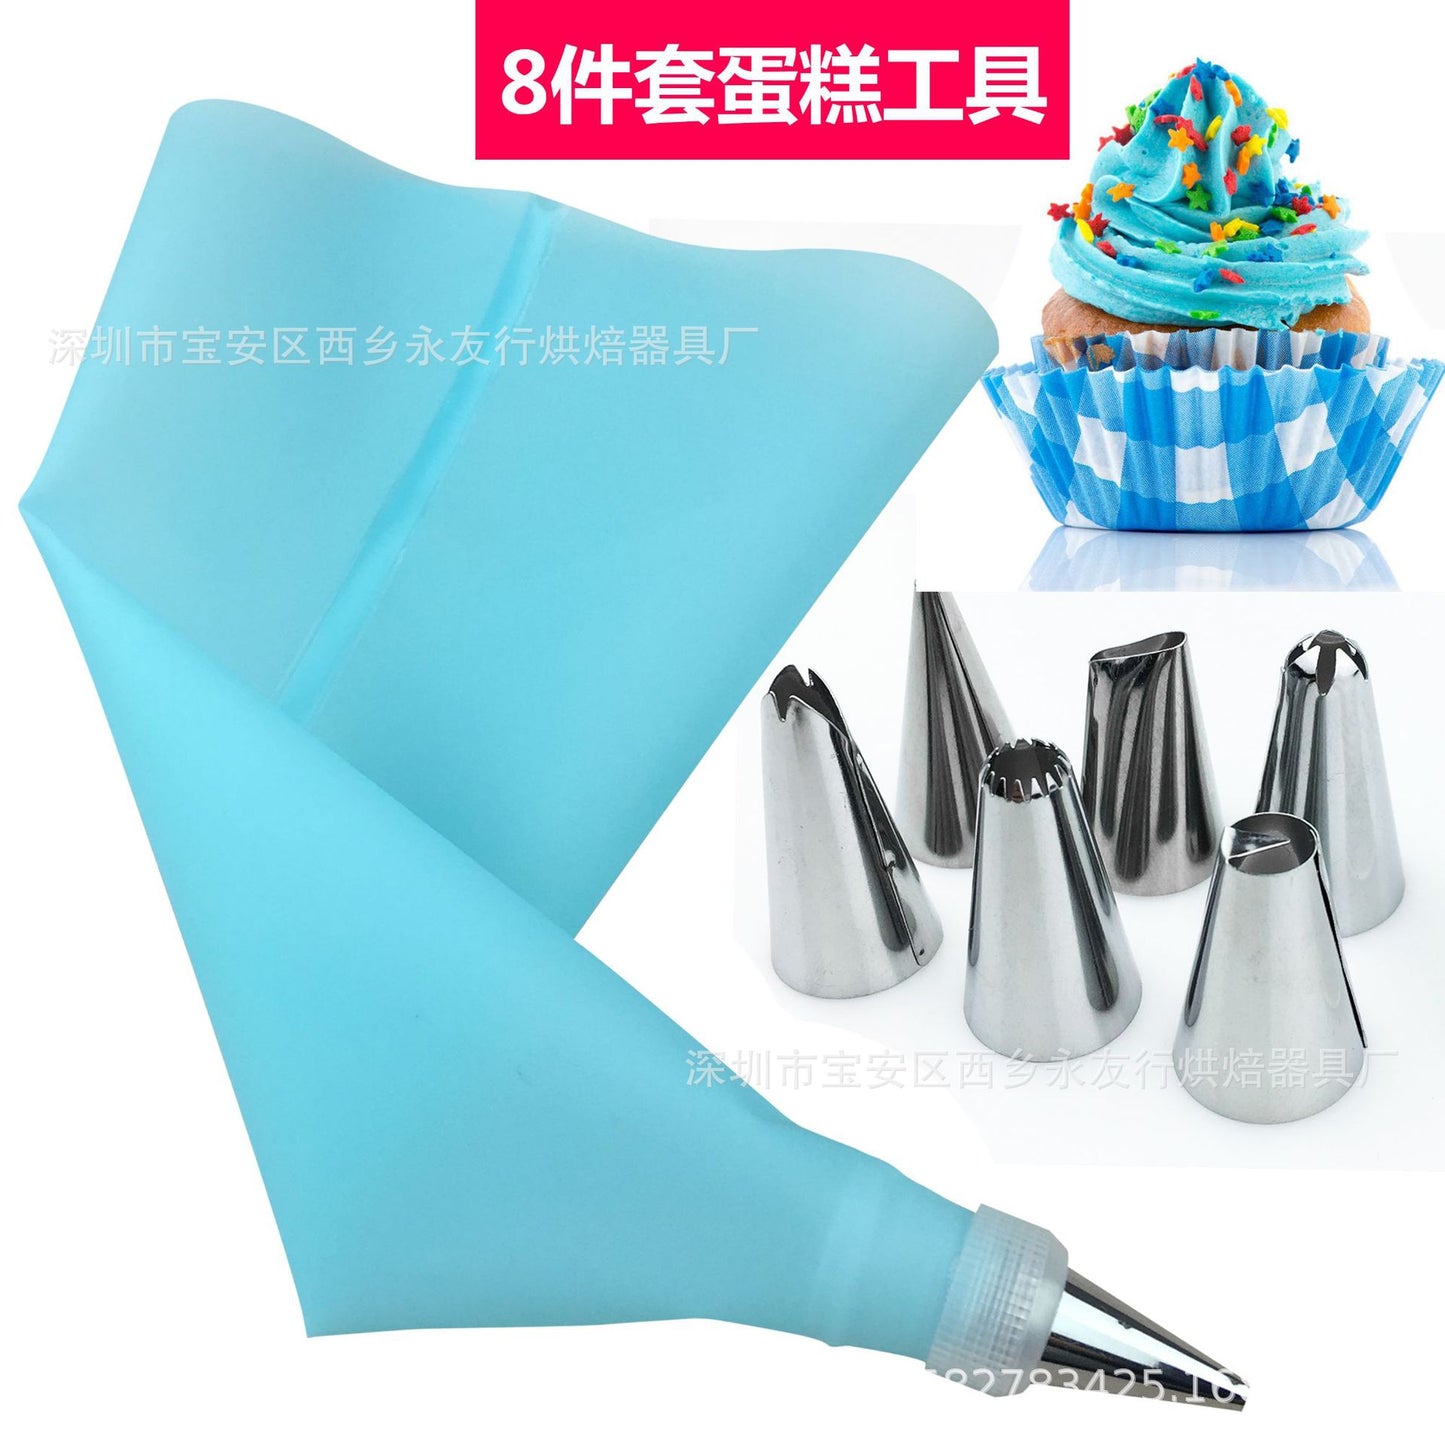 8 piece set of cake tools 6 stainless steel decorating mouth and silicone EVA flower bag with converter